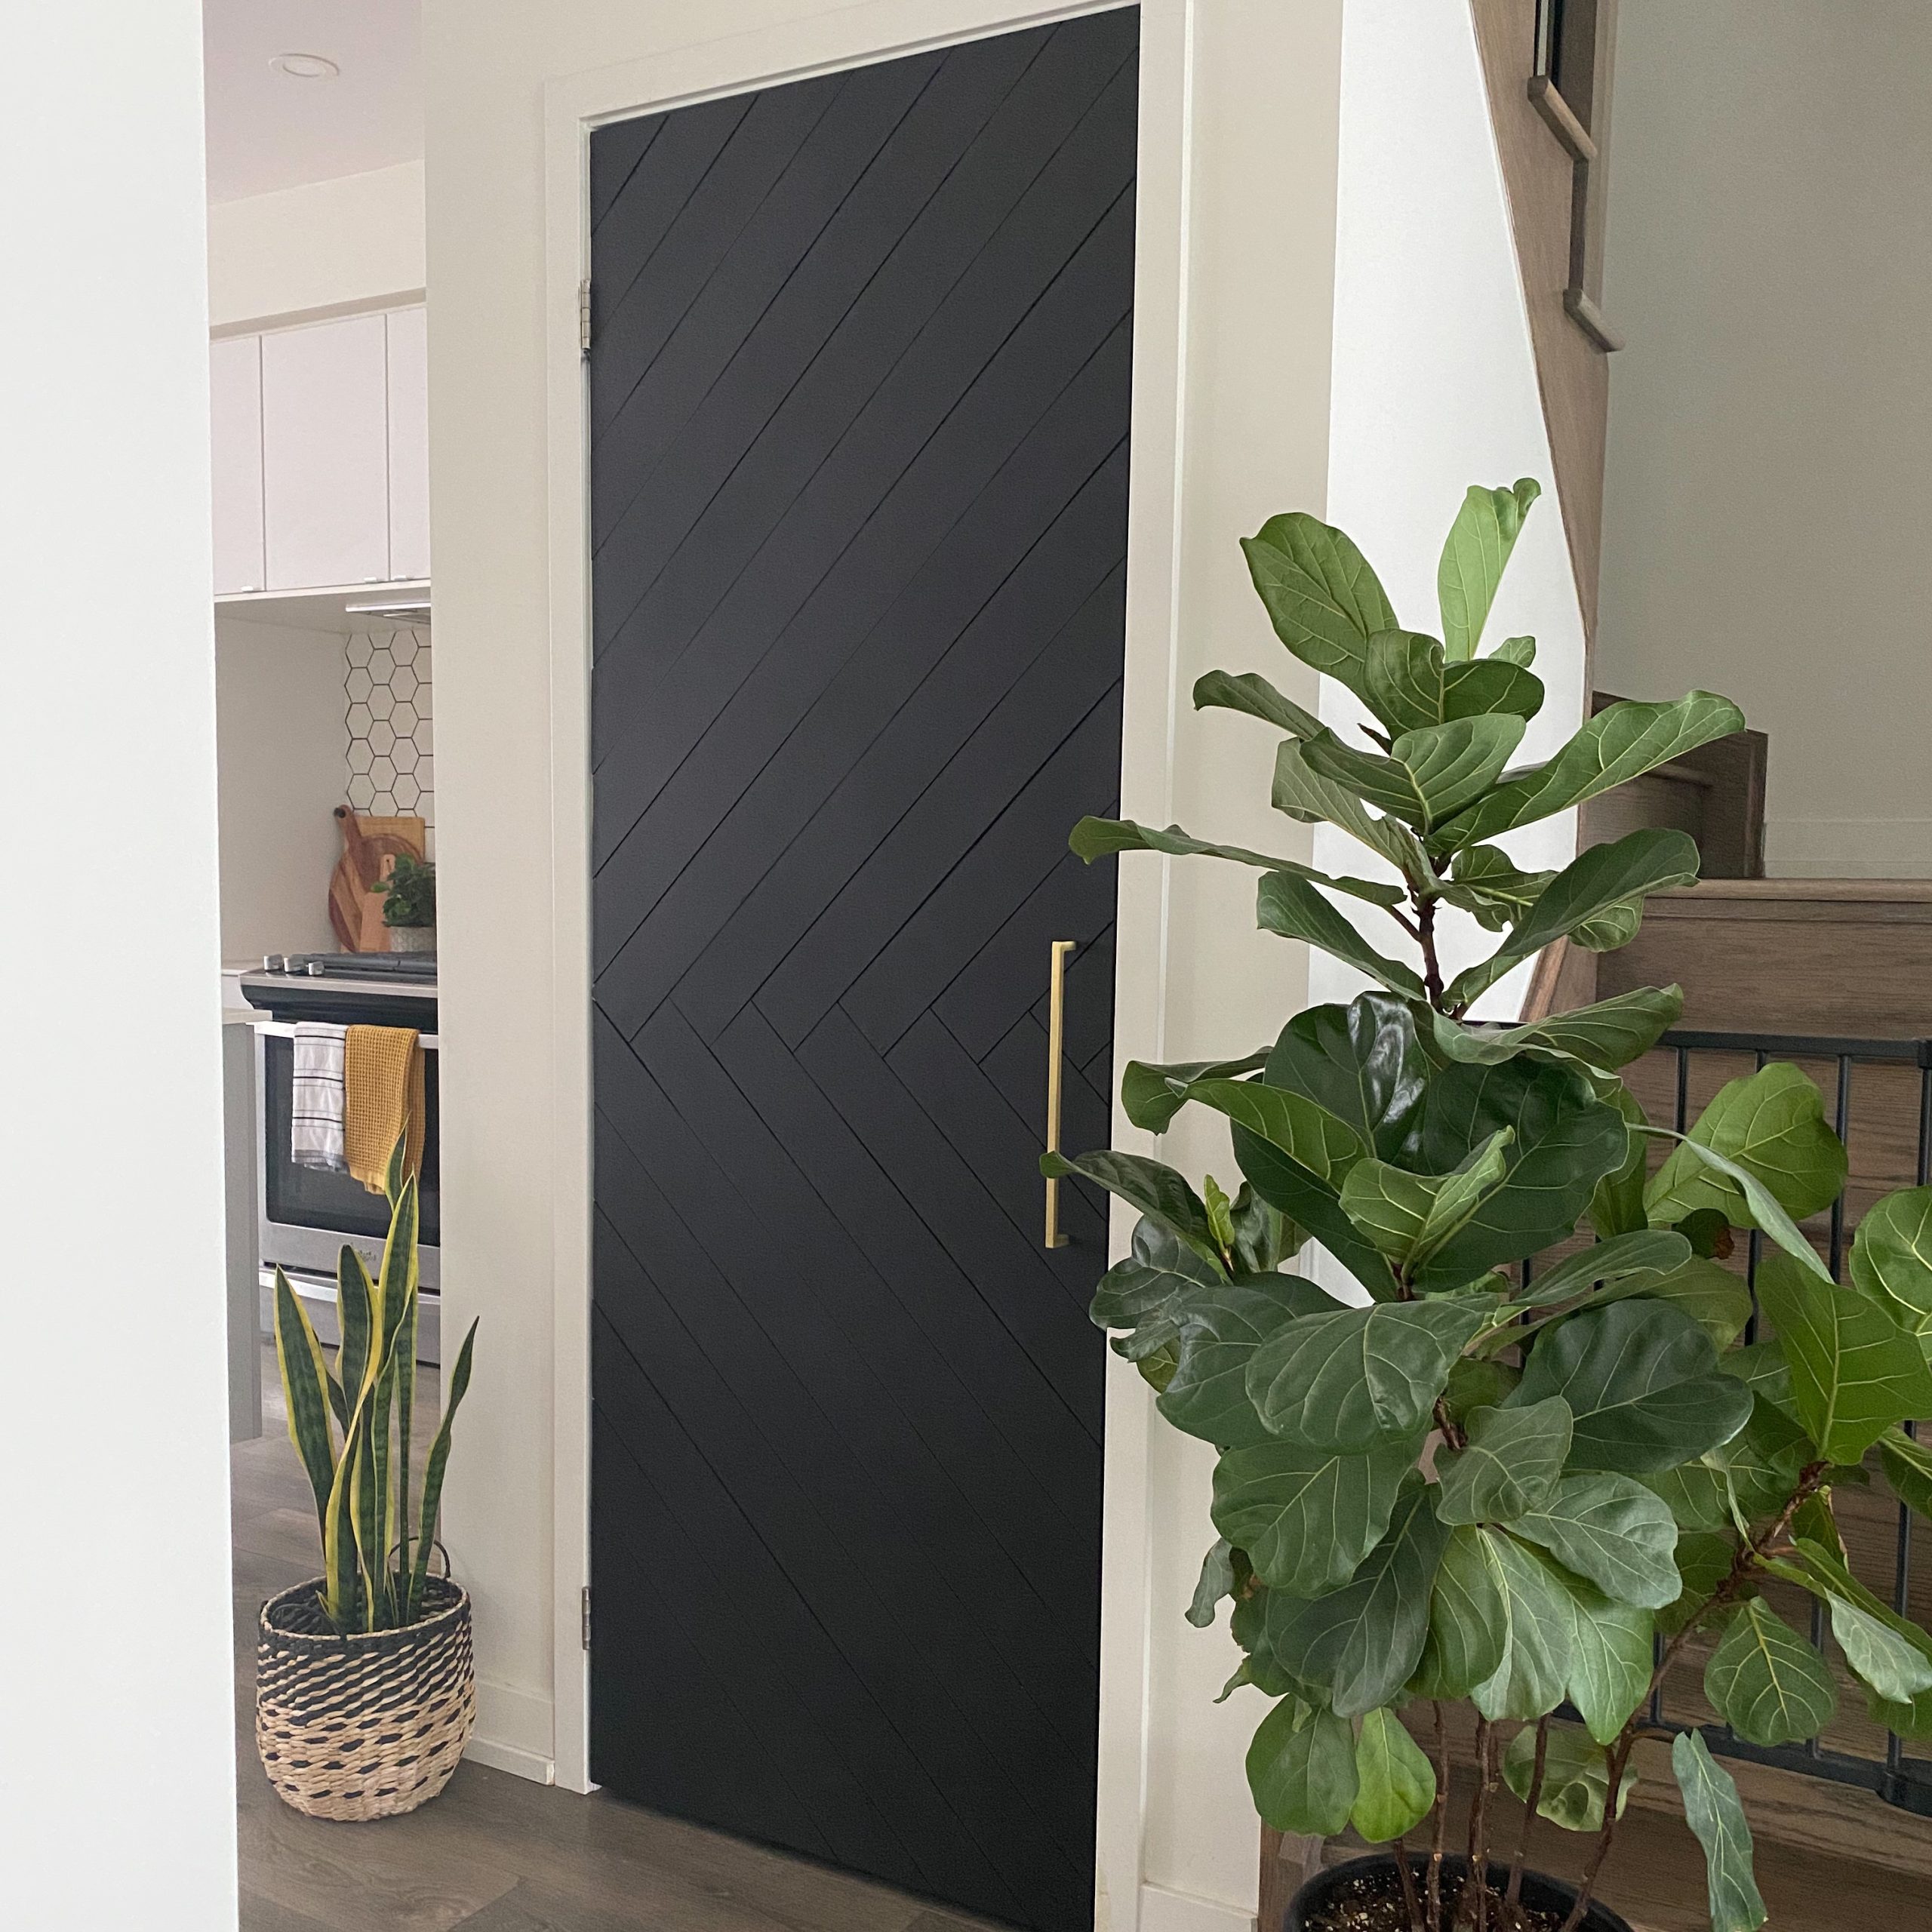 Black Interior Doors with White Trim - A Total Transformation